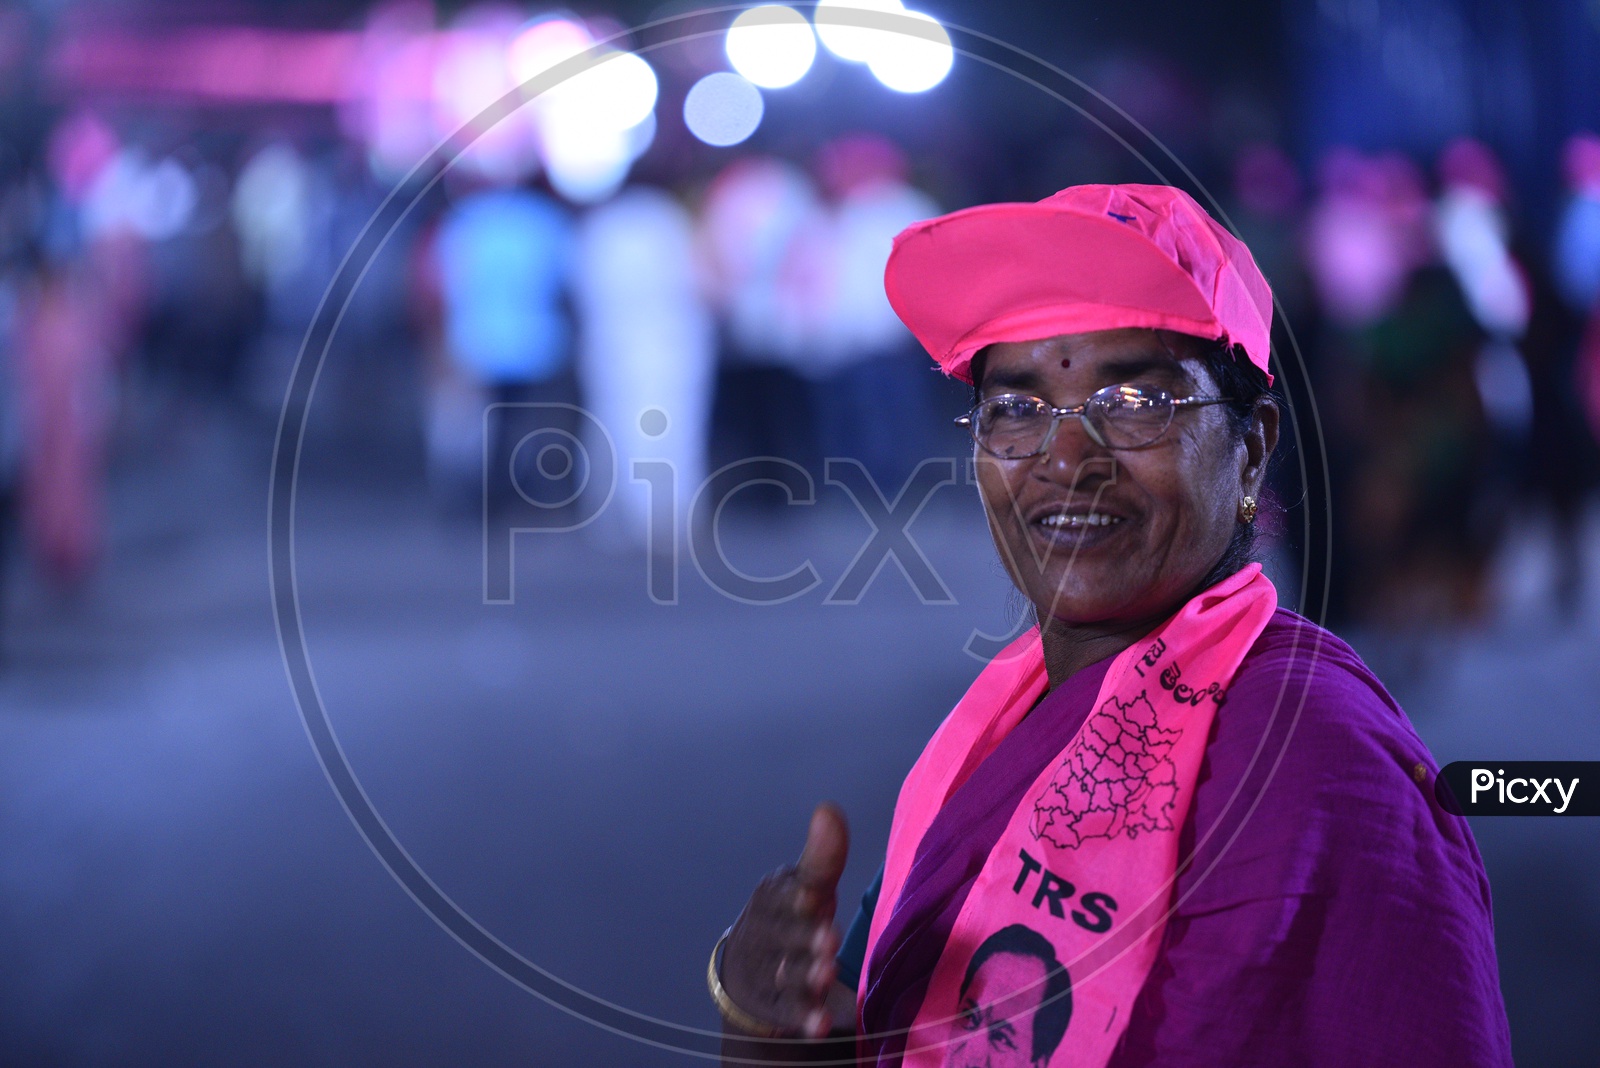 TRS Party Women Supporters Wearing TRS Party Caps During The Election Camapign 2018